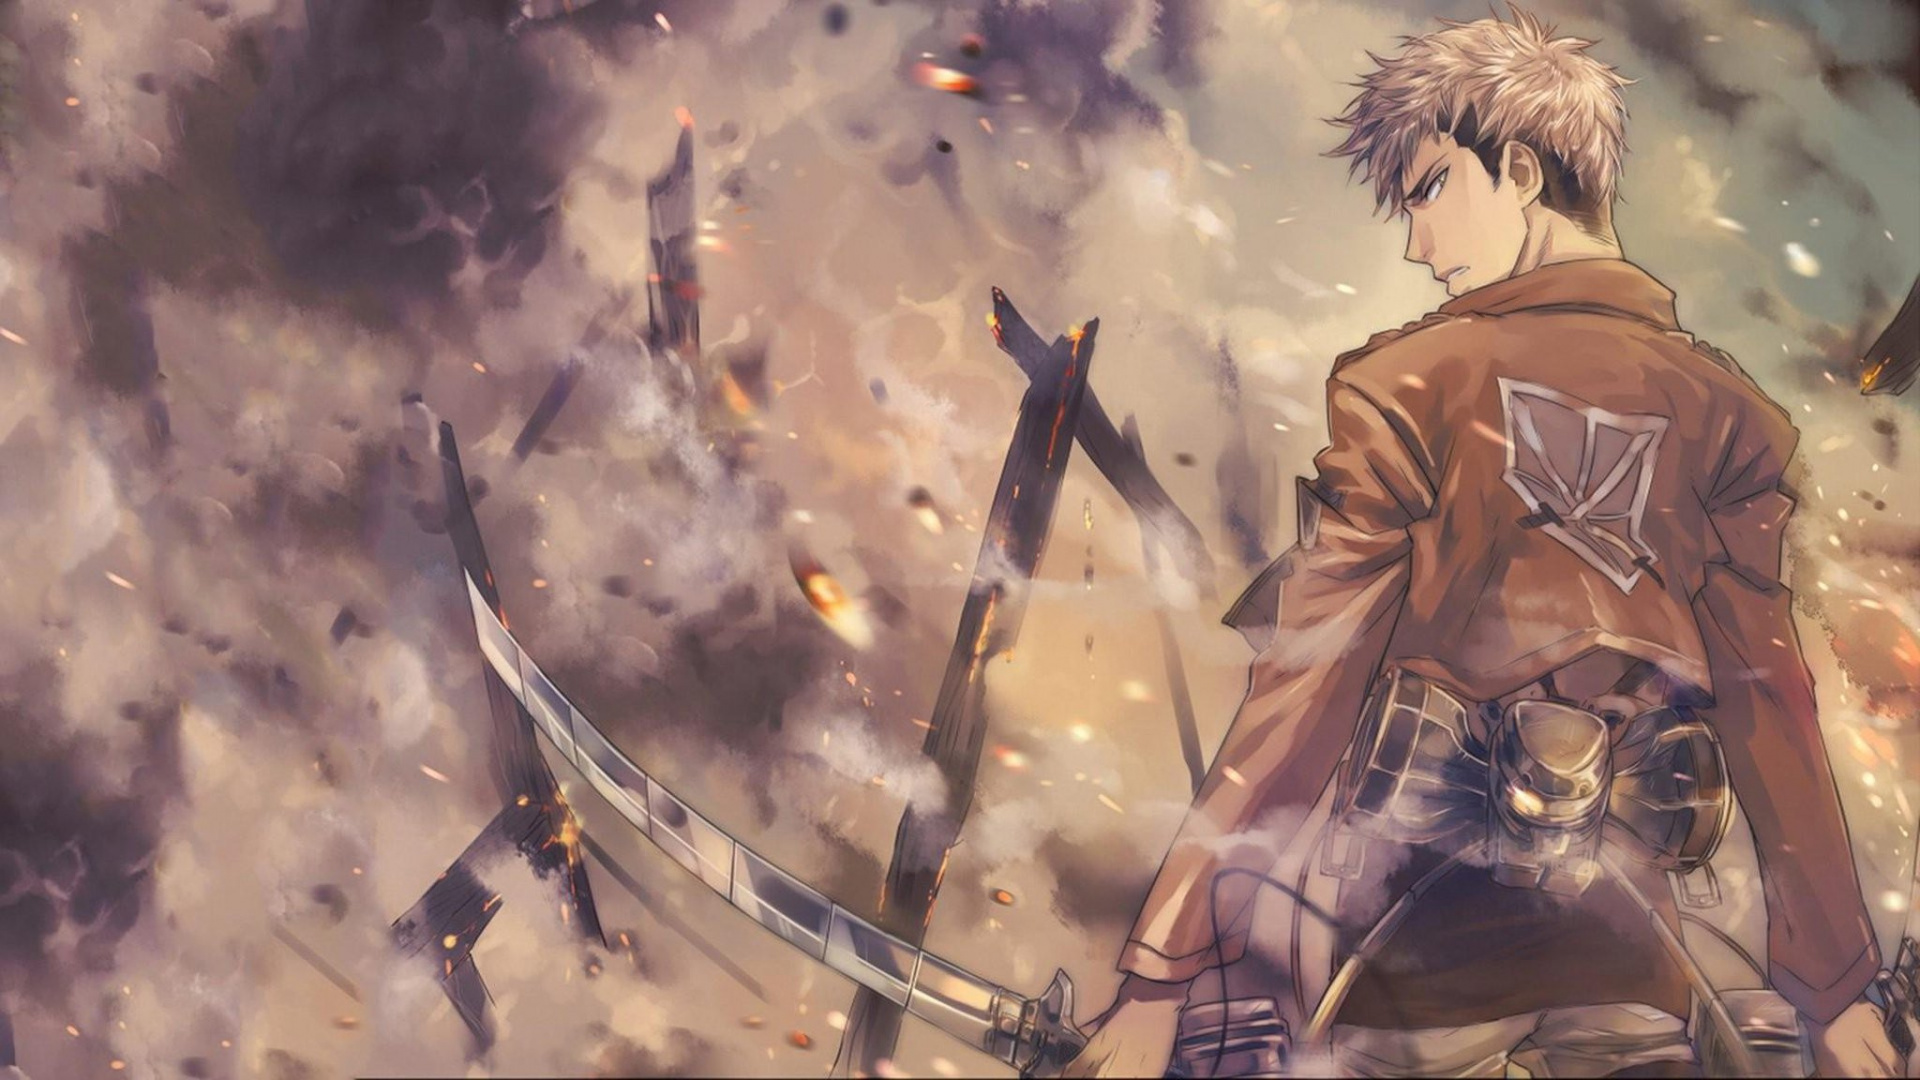 Man in Brown Coat Holding Sword Anime Character. Wallpaper in 1920x1080 Resolution